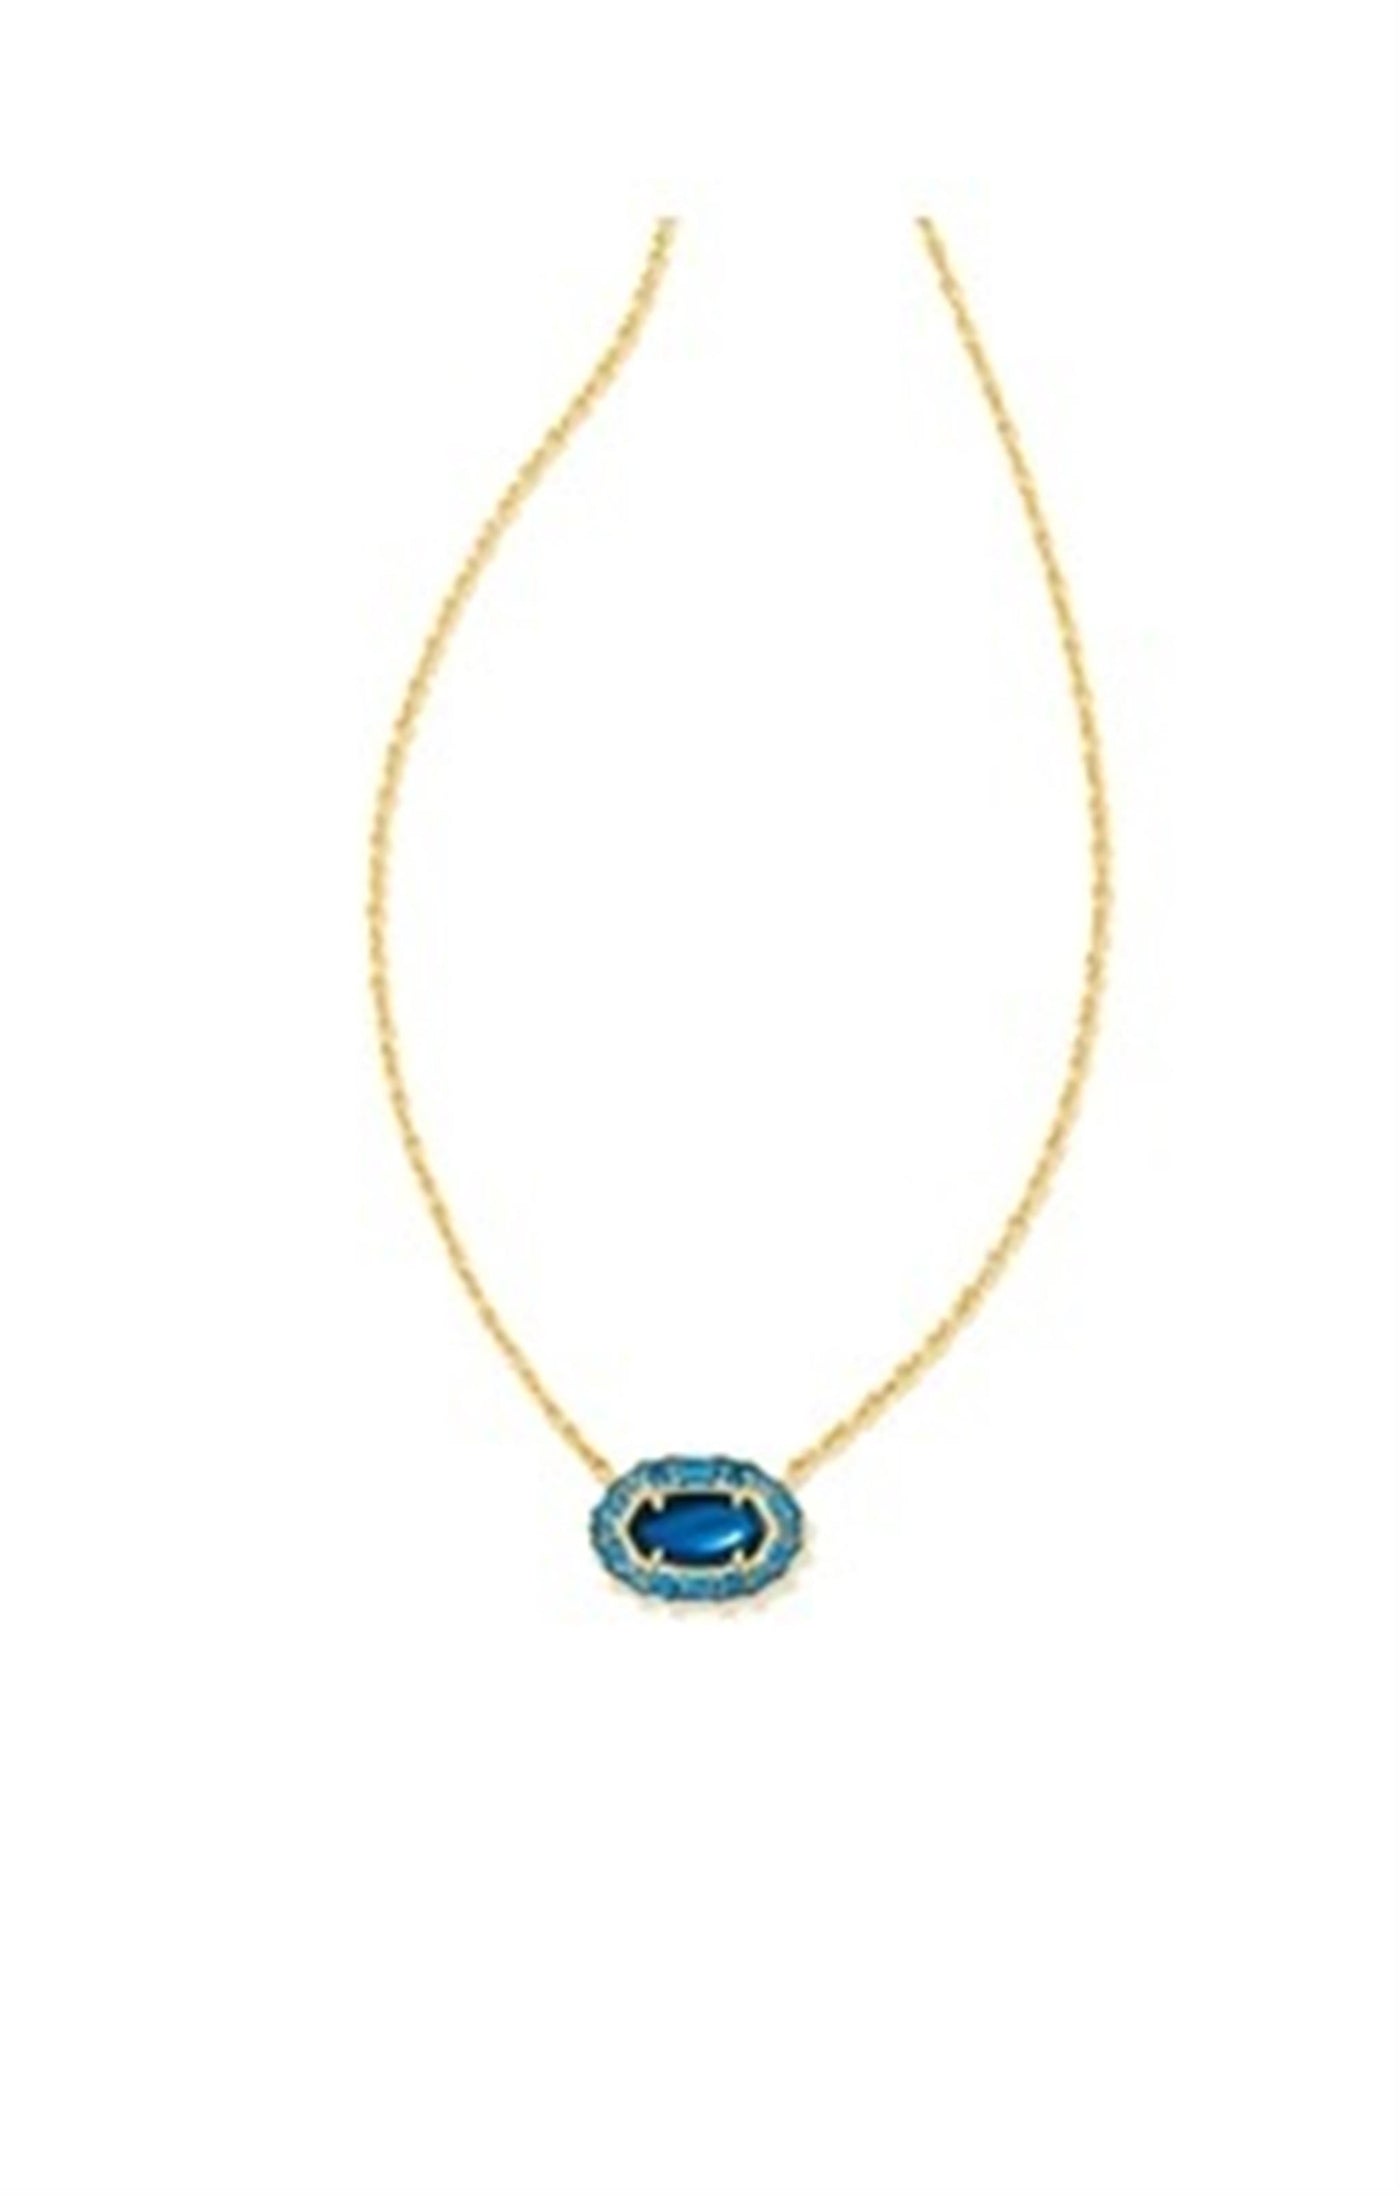 Gold Tone Necklace Featuring Sea Blue Illusion by Kendra Scott